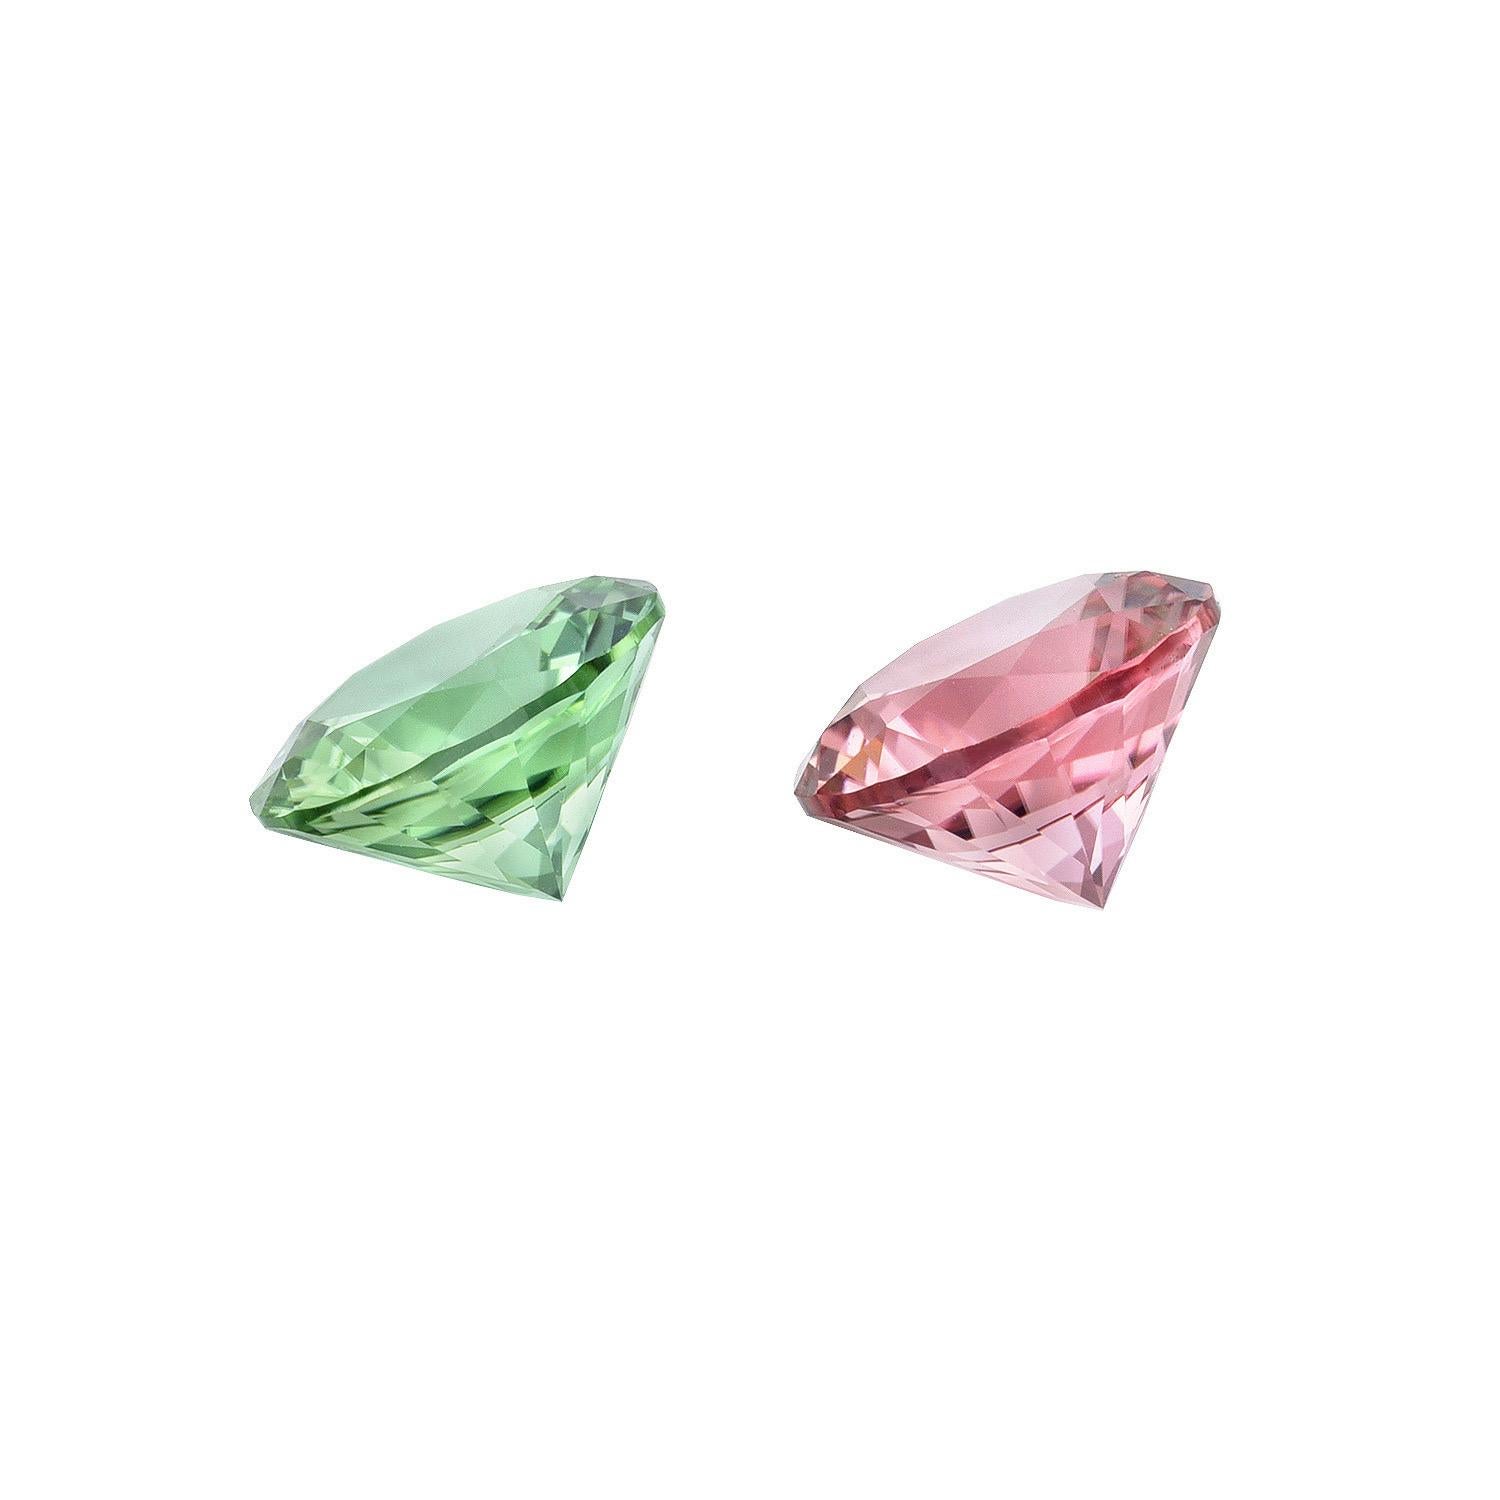 pink and green gemstones